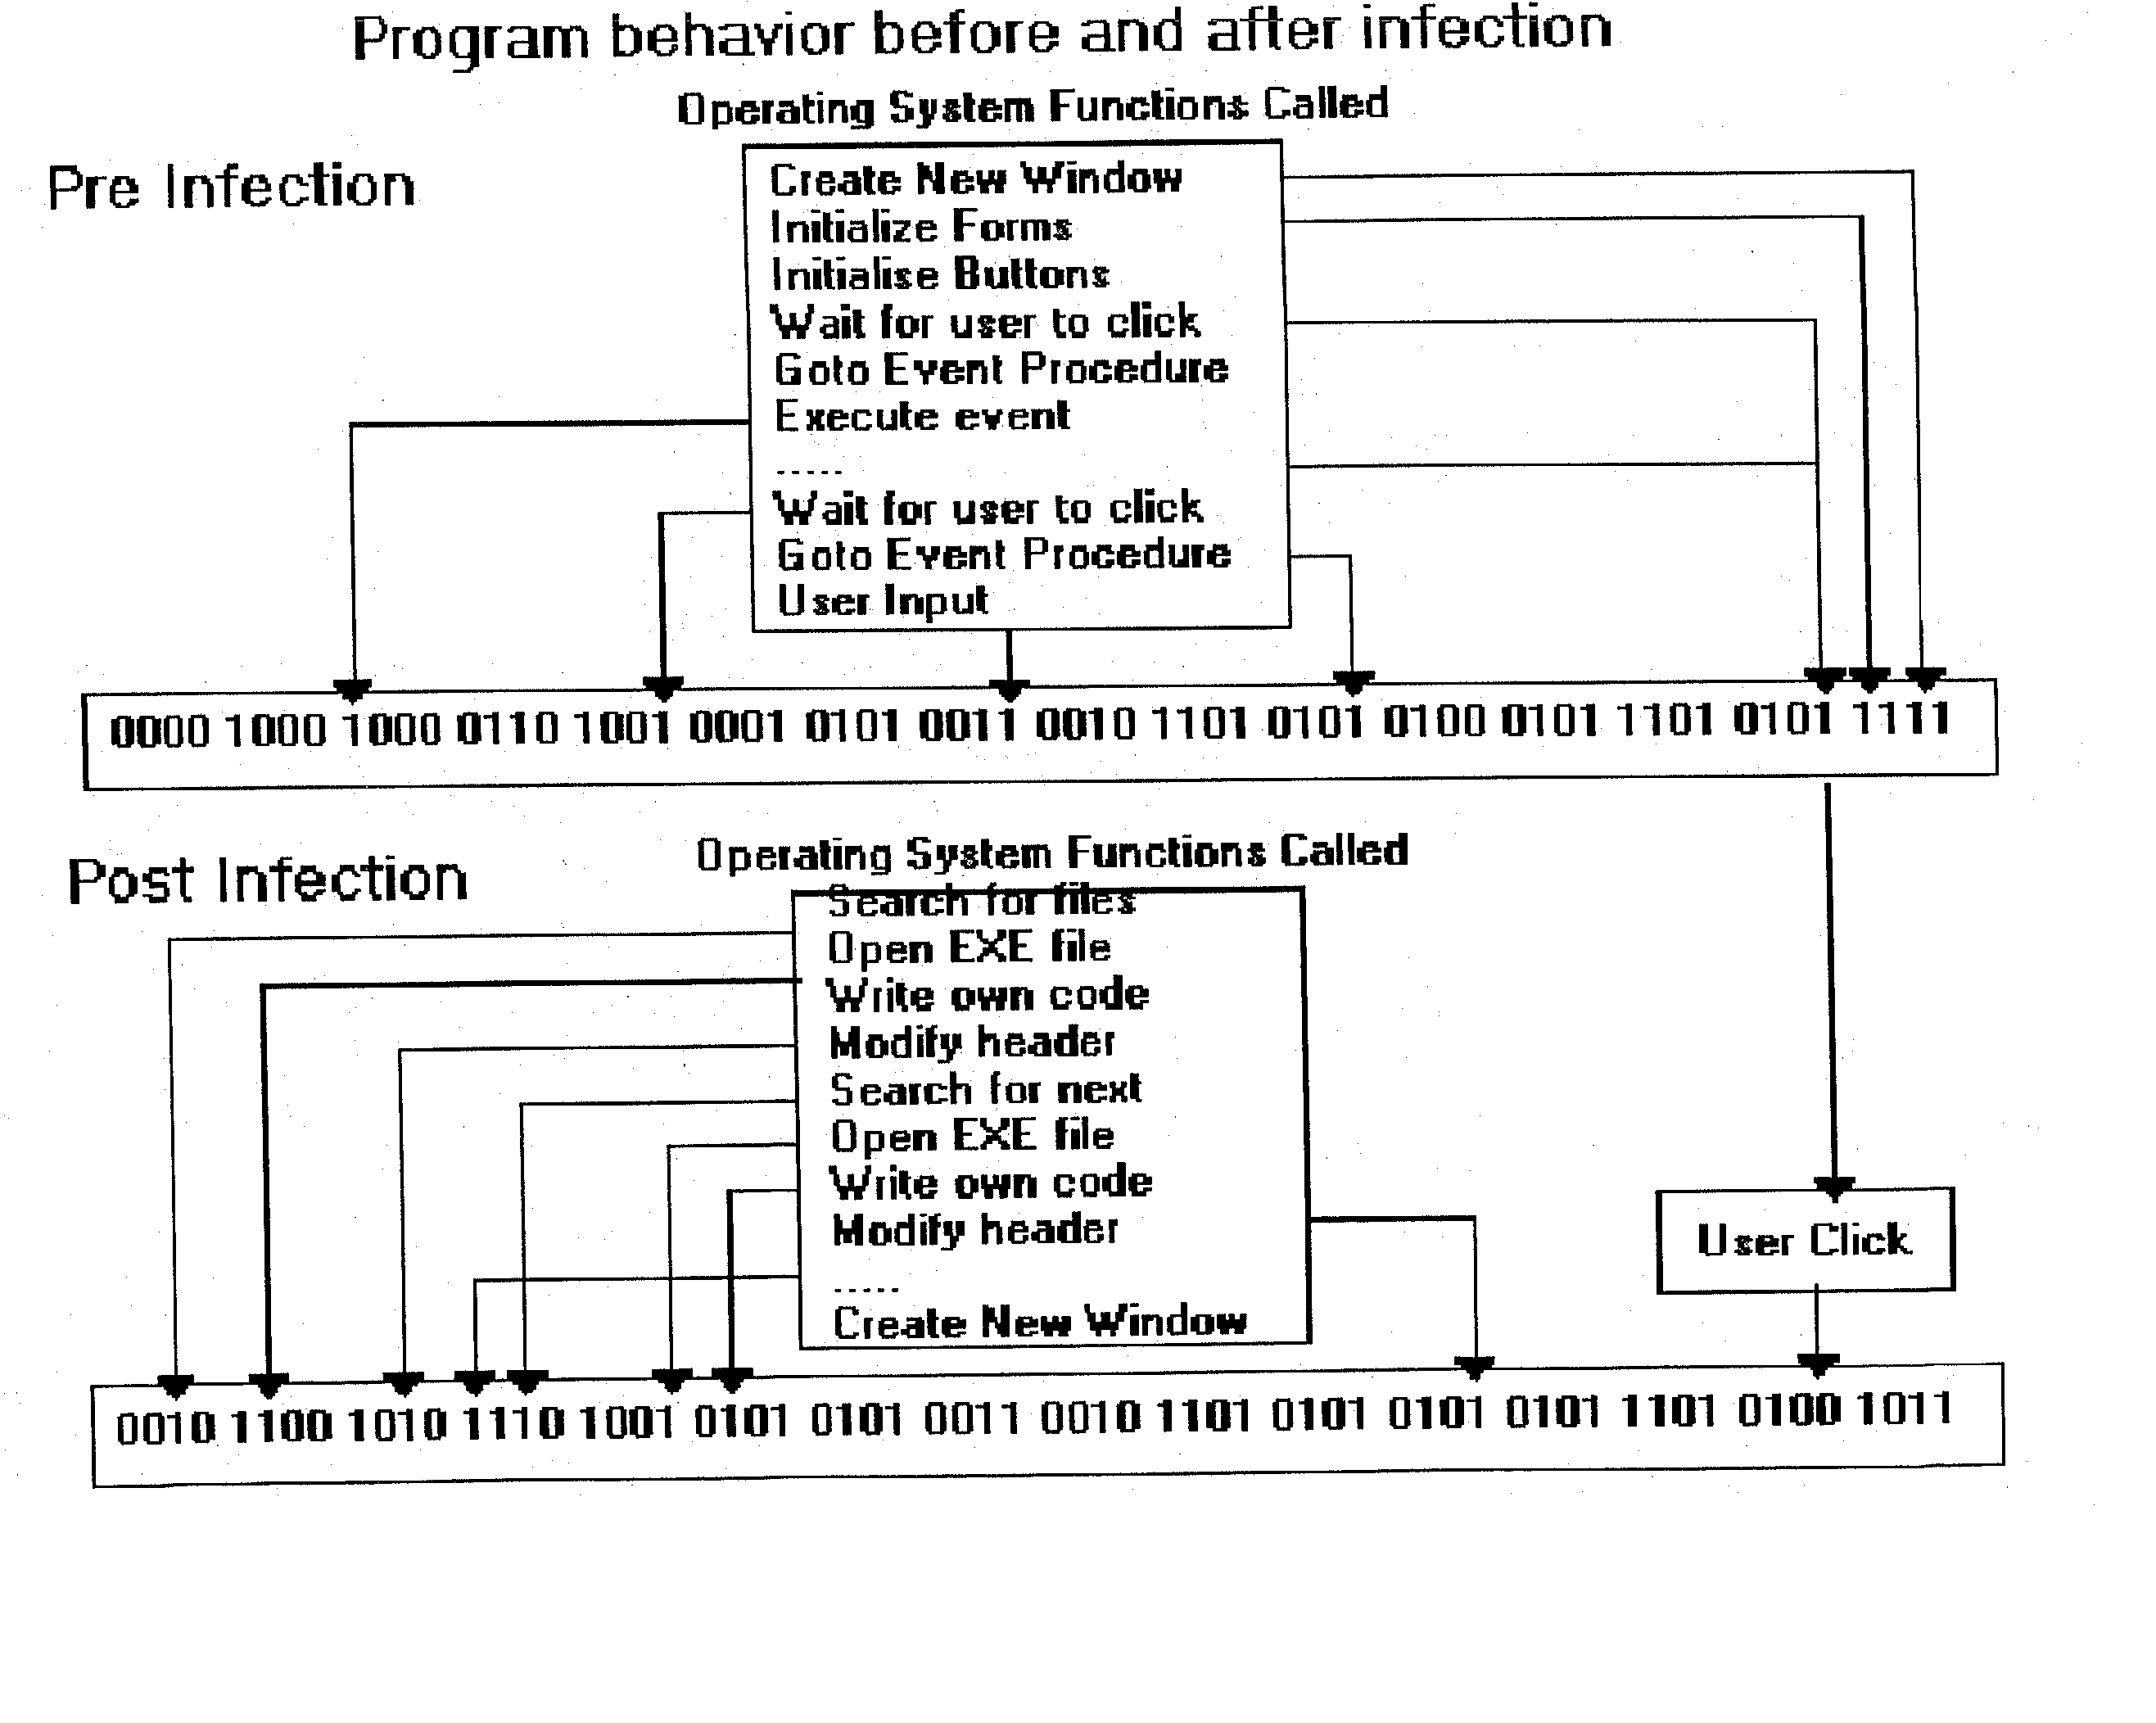 Computer immune system and method for detecting unwanted code in a P-code or partially compiled native-code program executing within a virtual machine